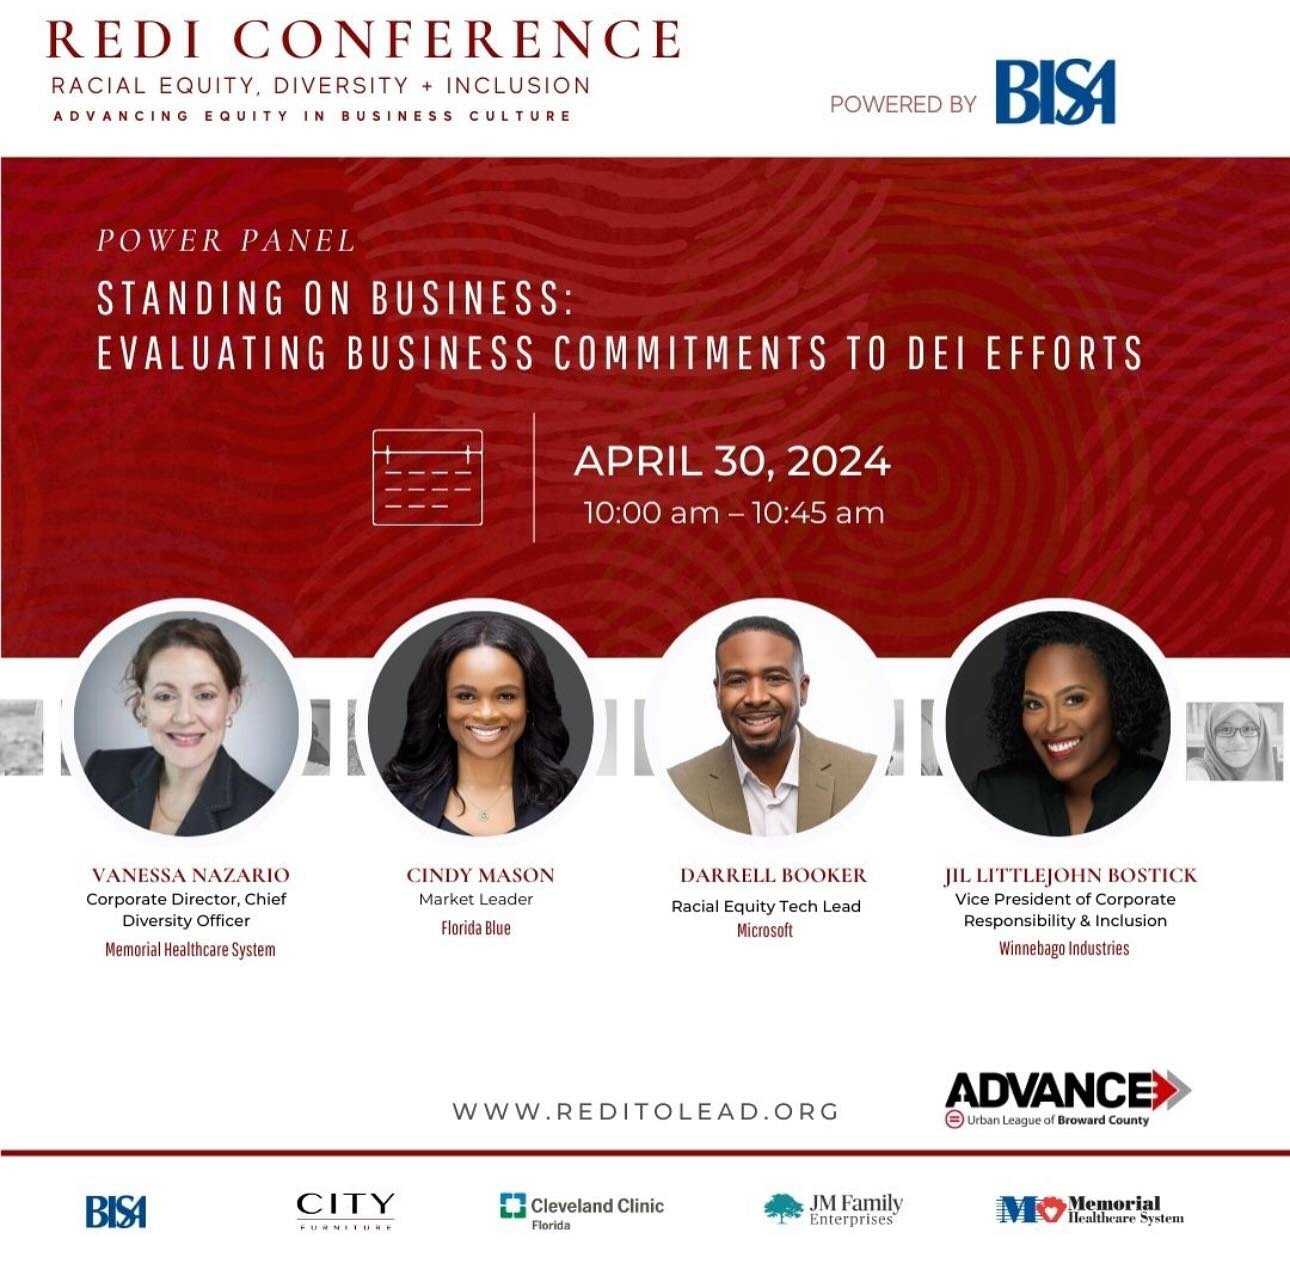 Join me TODAY at the Urban League of Broward County&rsquo;s REDI to Lead Conference where I&rsquo;ll be speaking on the power panel, &ldquo;Standing on Business: Evaluating Business Commitments to DEI Efforts&rdquo; at 10:00AM on Tuesday, April 30th.